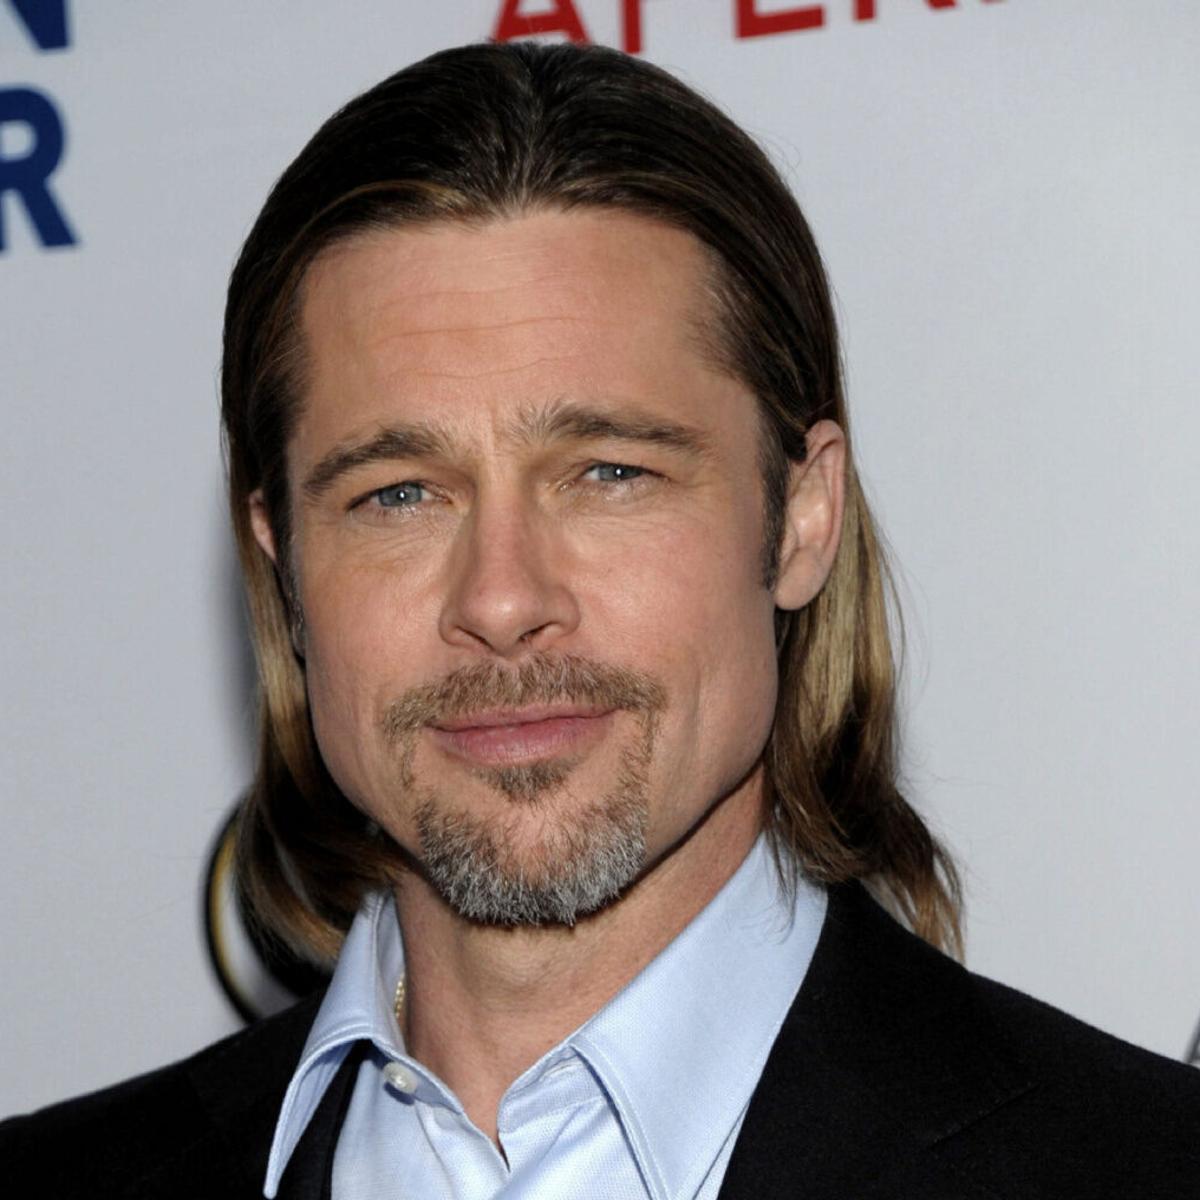 Brad Pitt becomes the face of women's fragrance Chanel No. 5